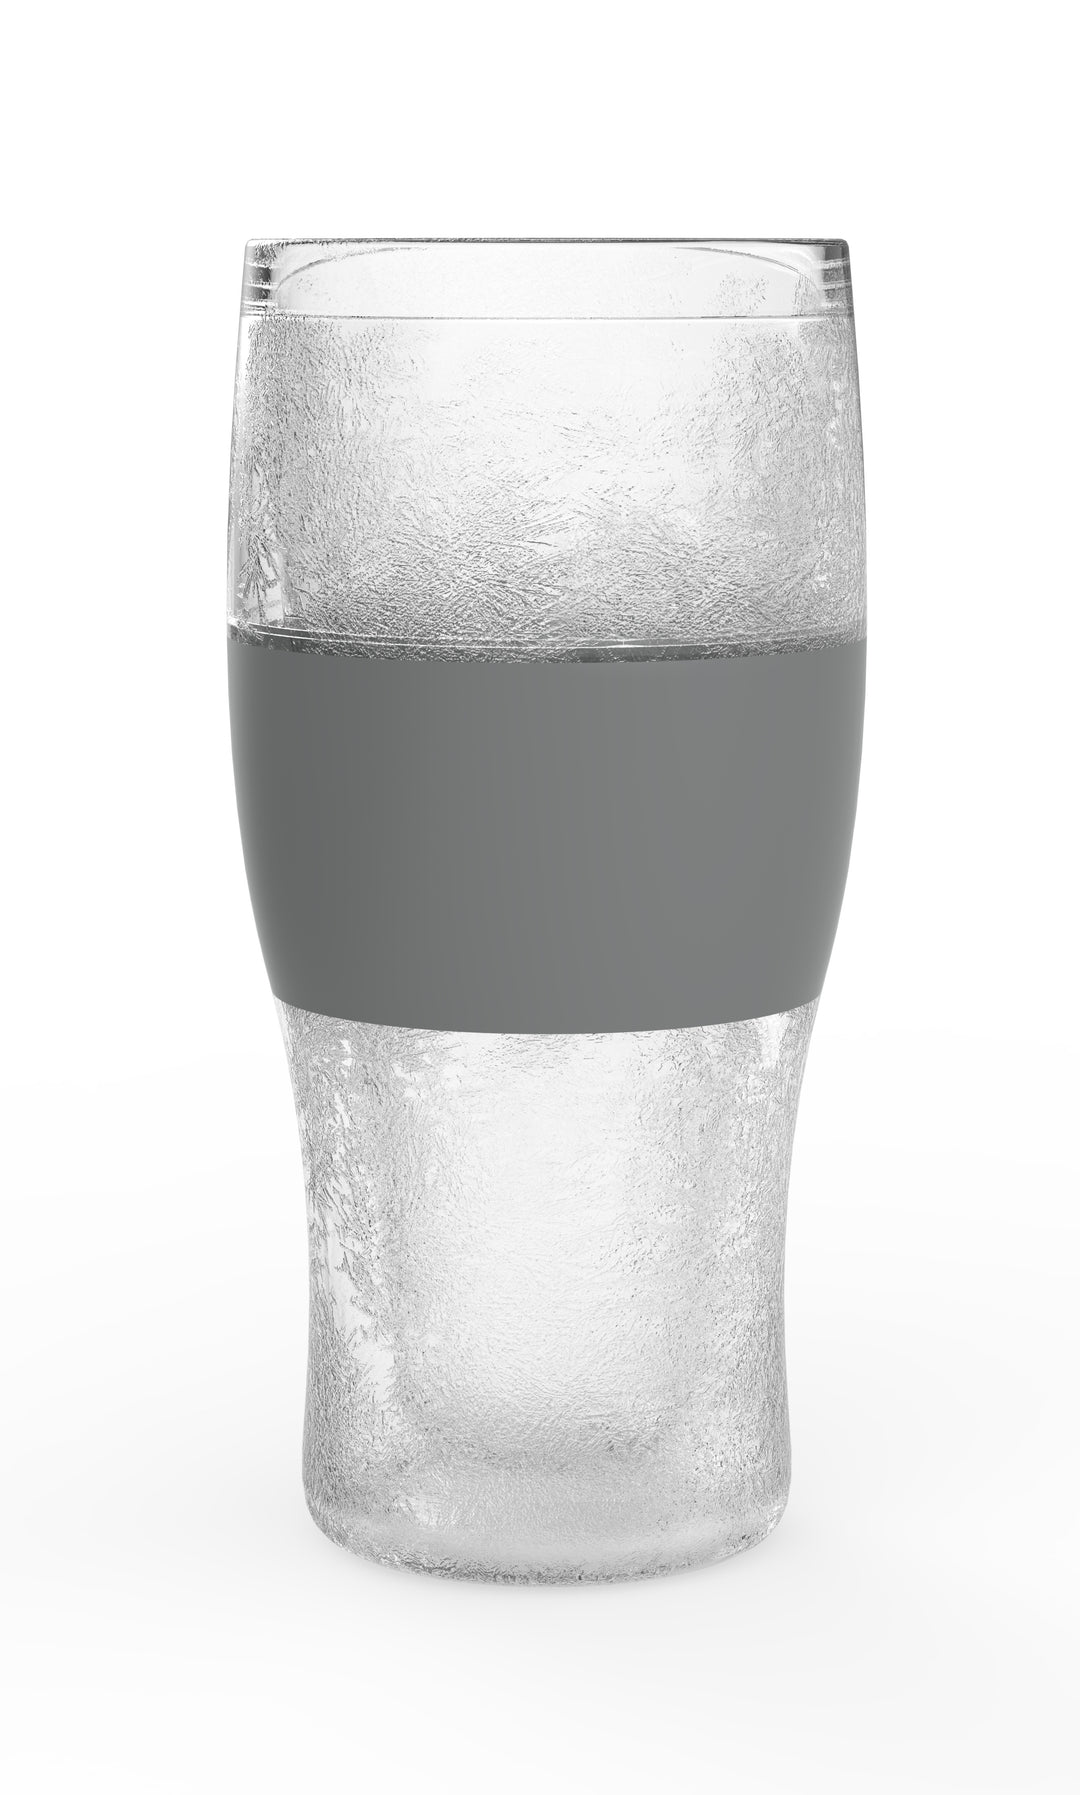 Host Beer Freeze Cooling Cup, Single, Grey